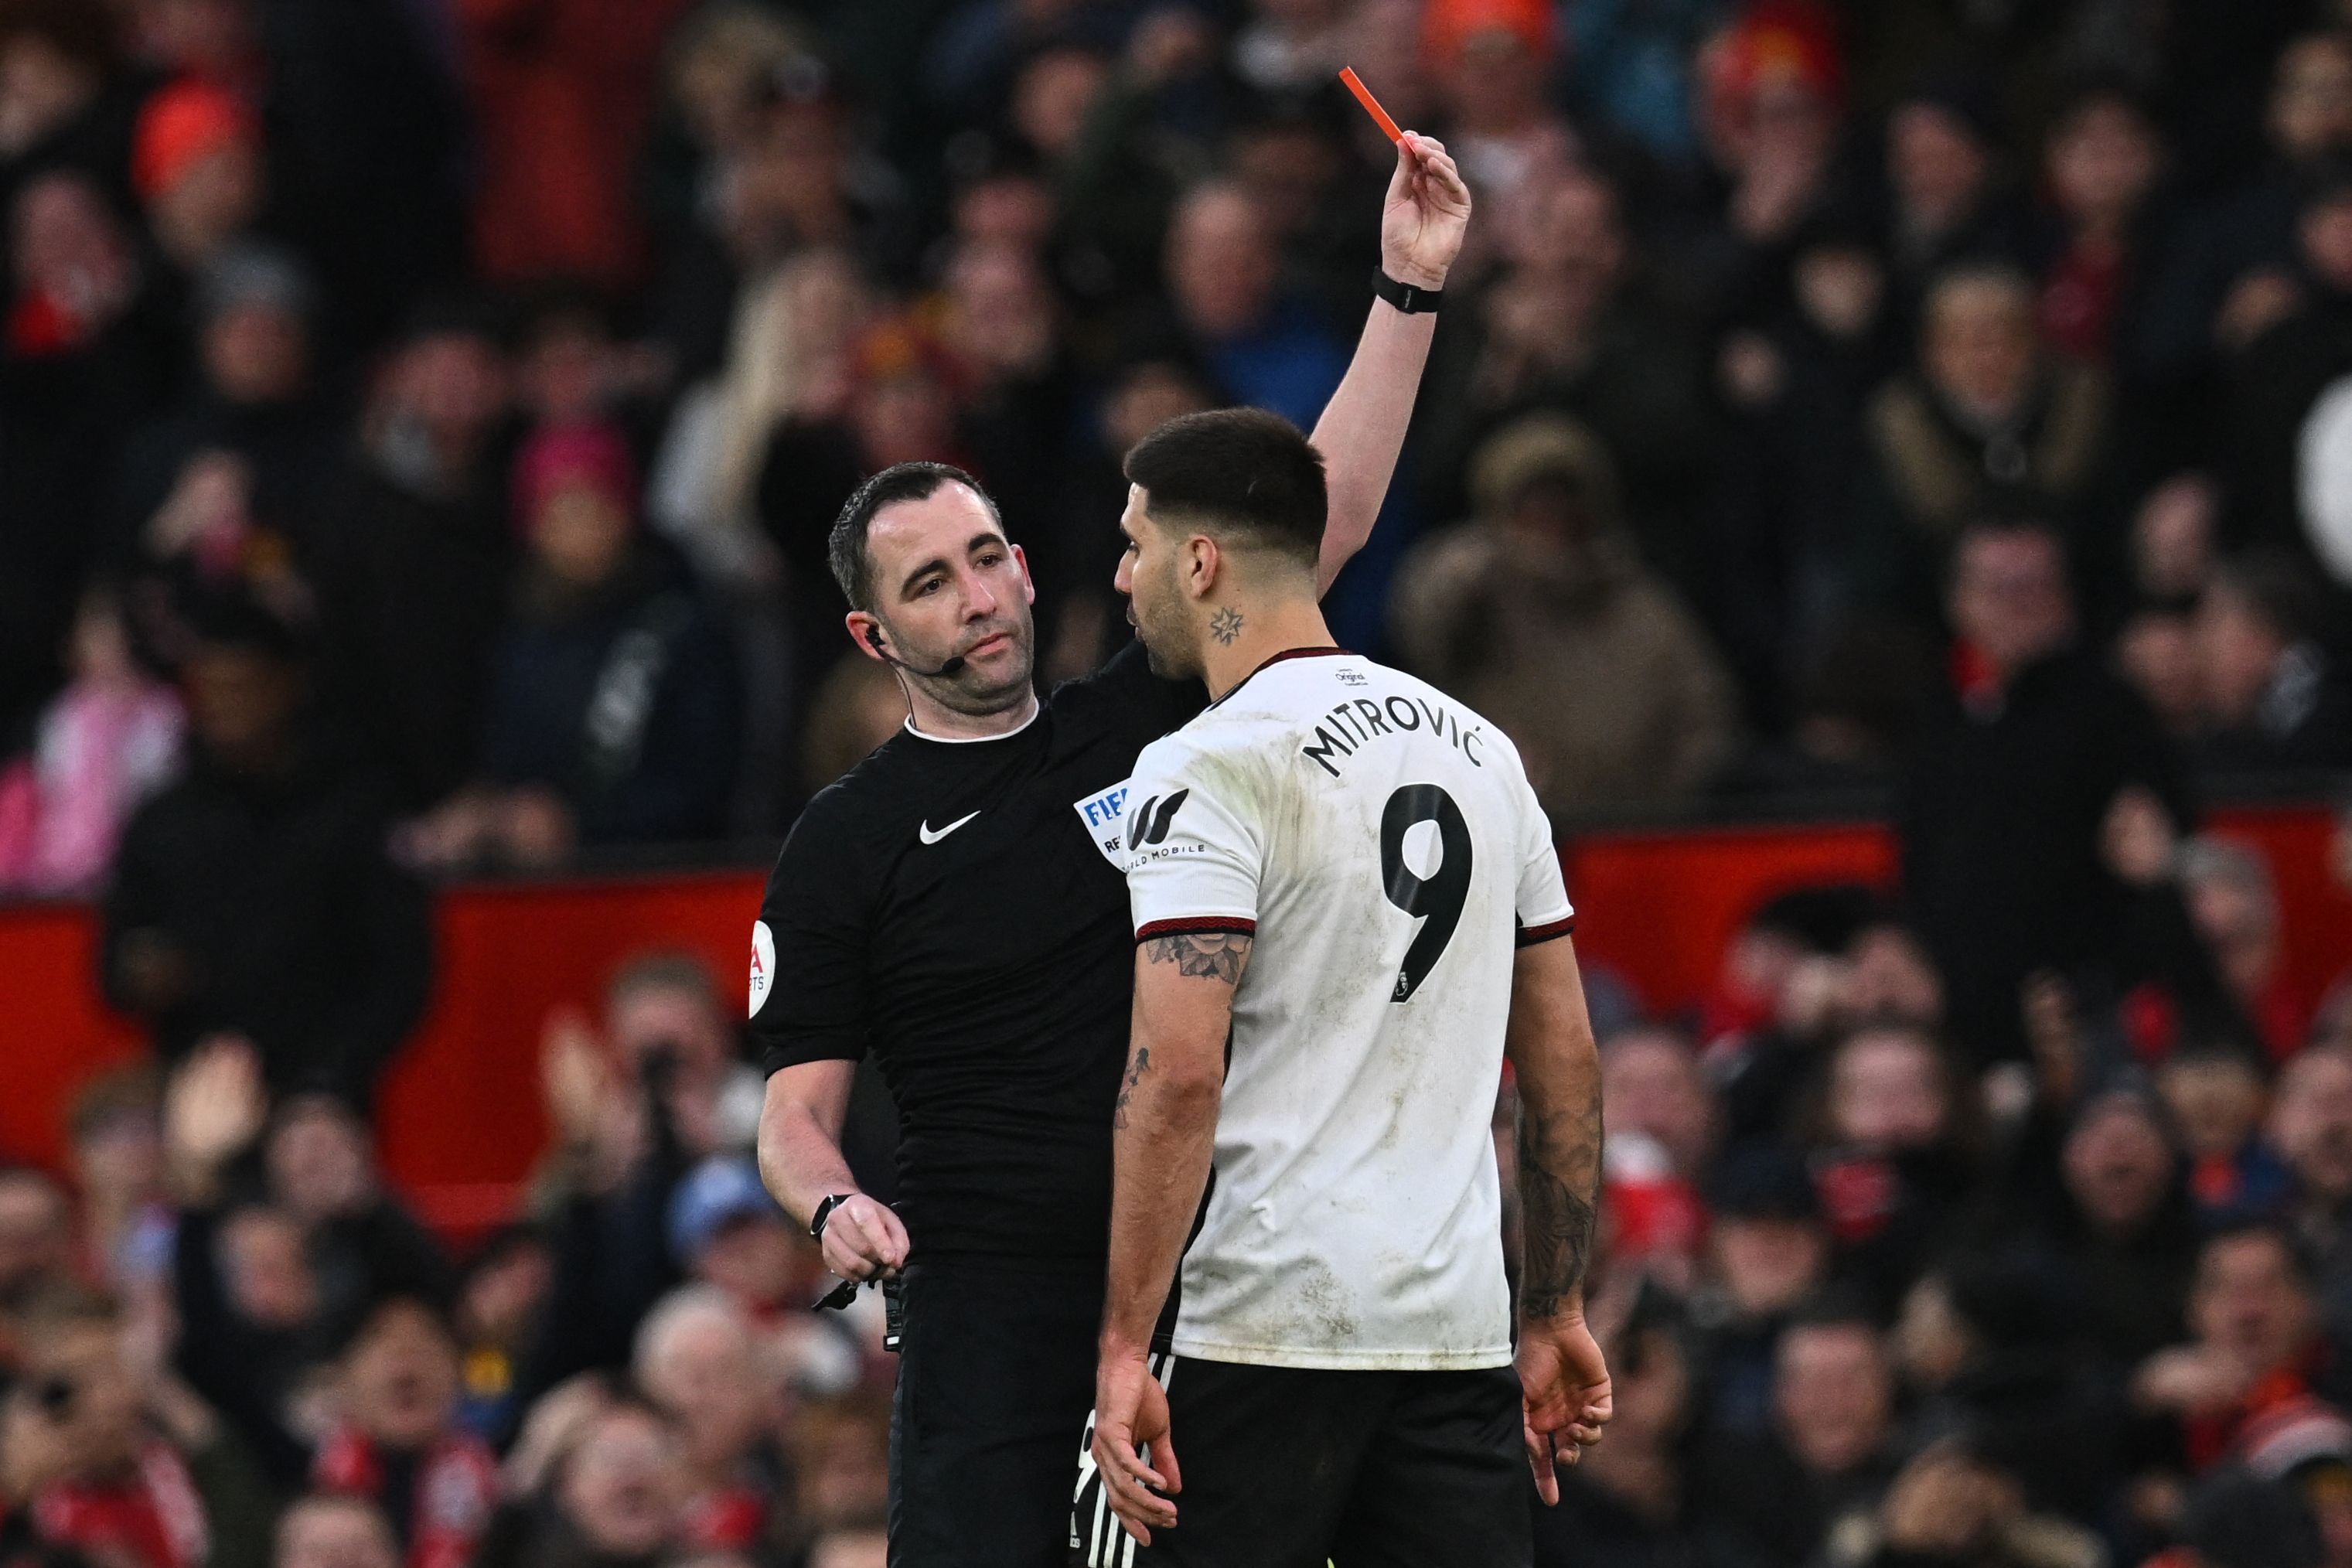 , Premier League spats are all the rage and we can’t get enough – it was a matter of time before an official got involved